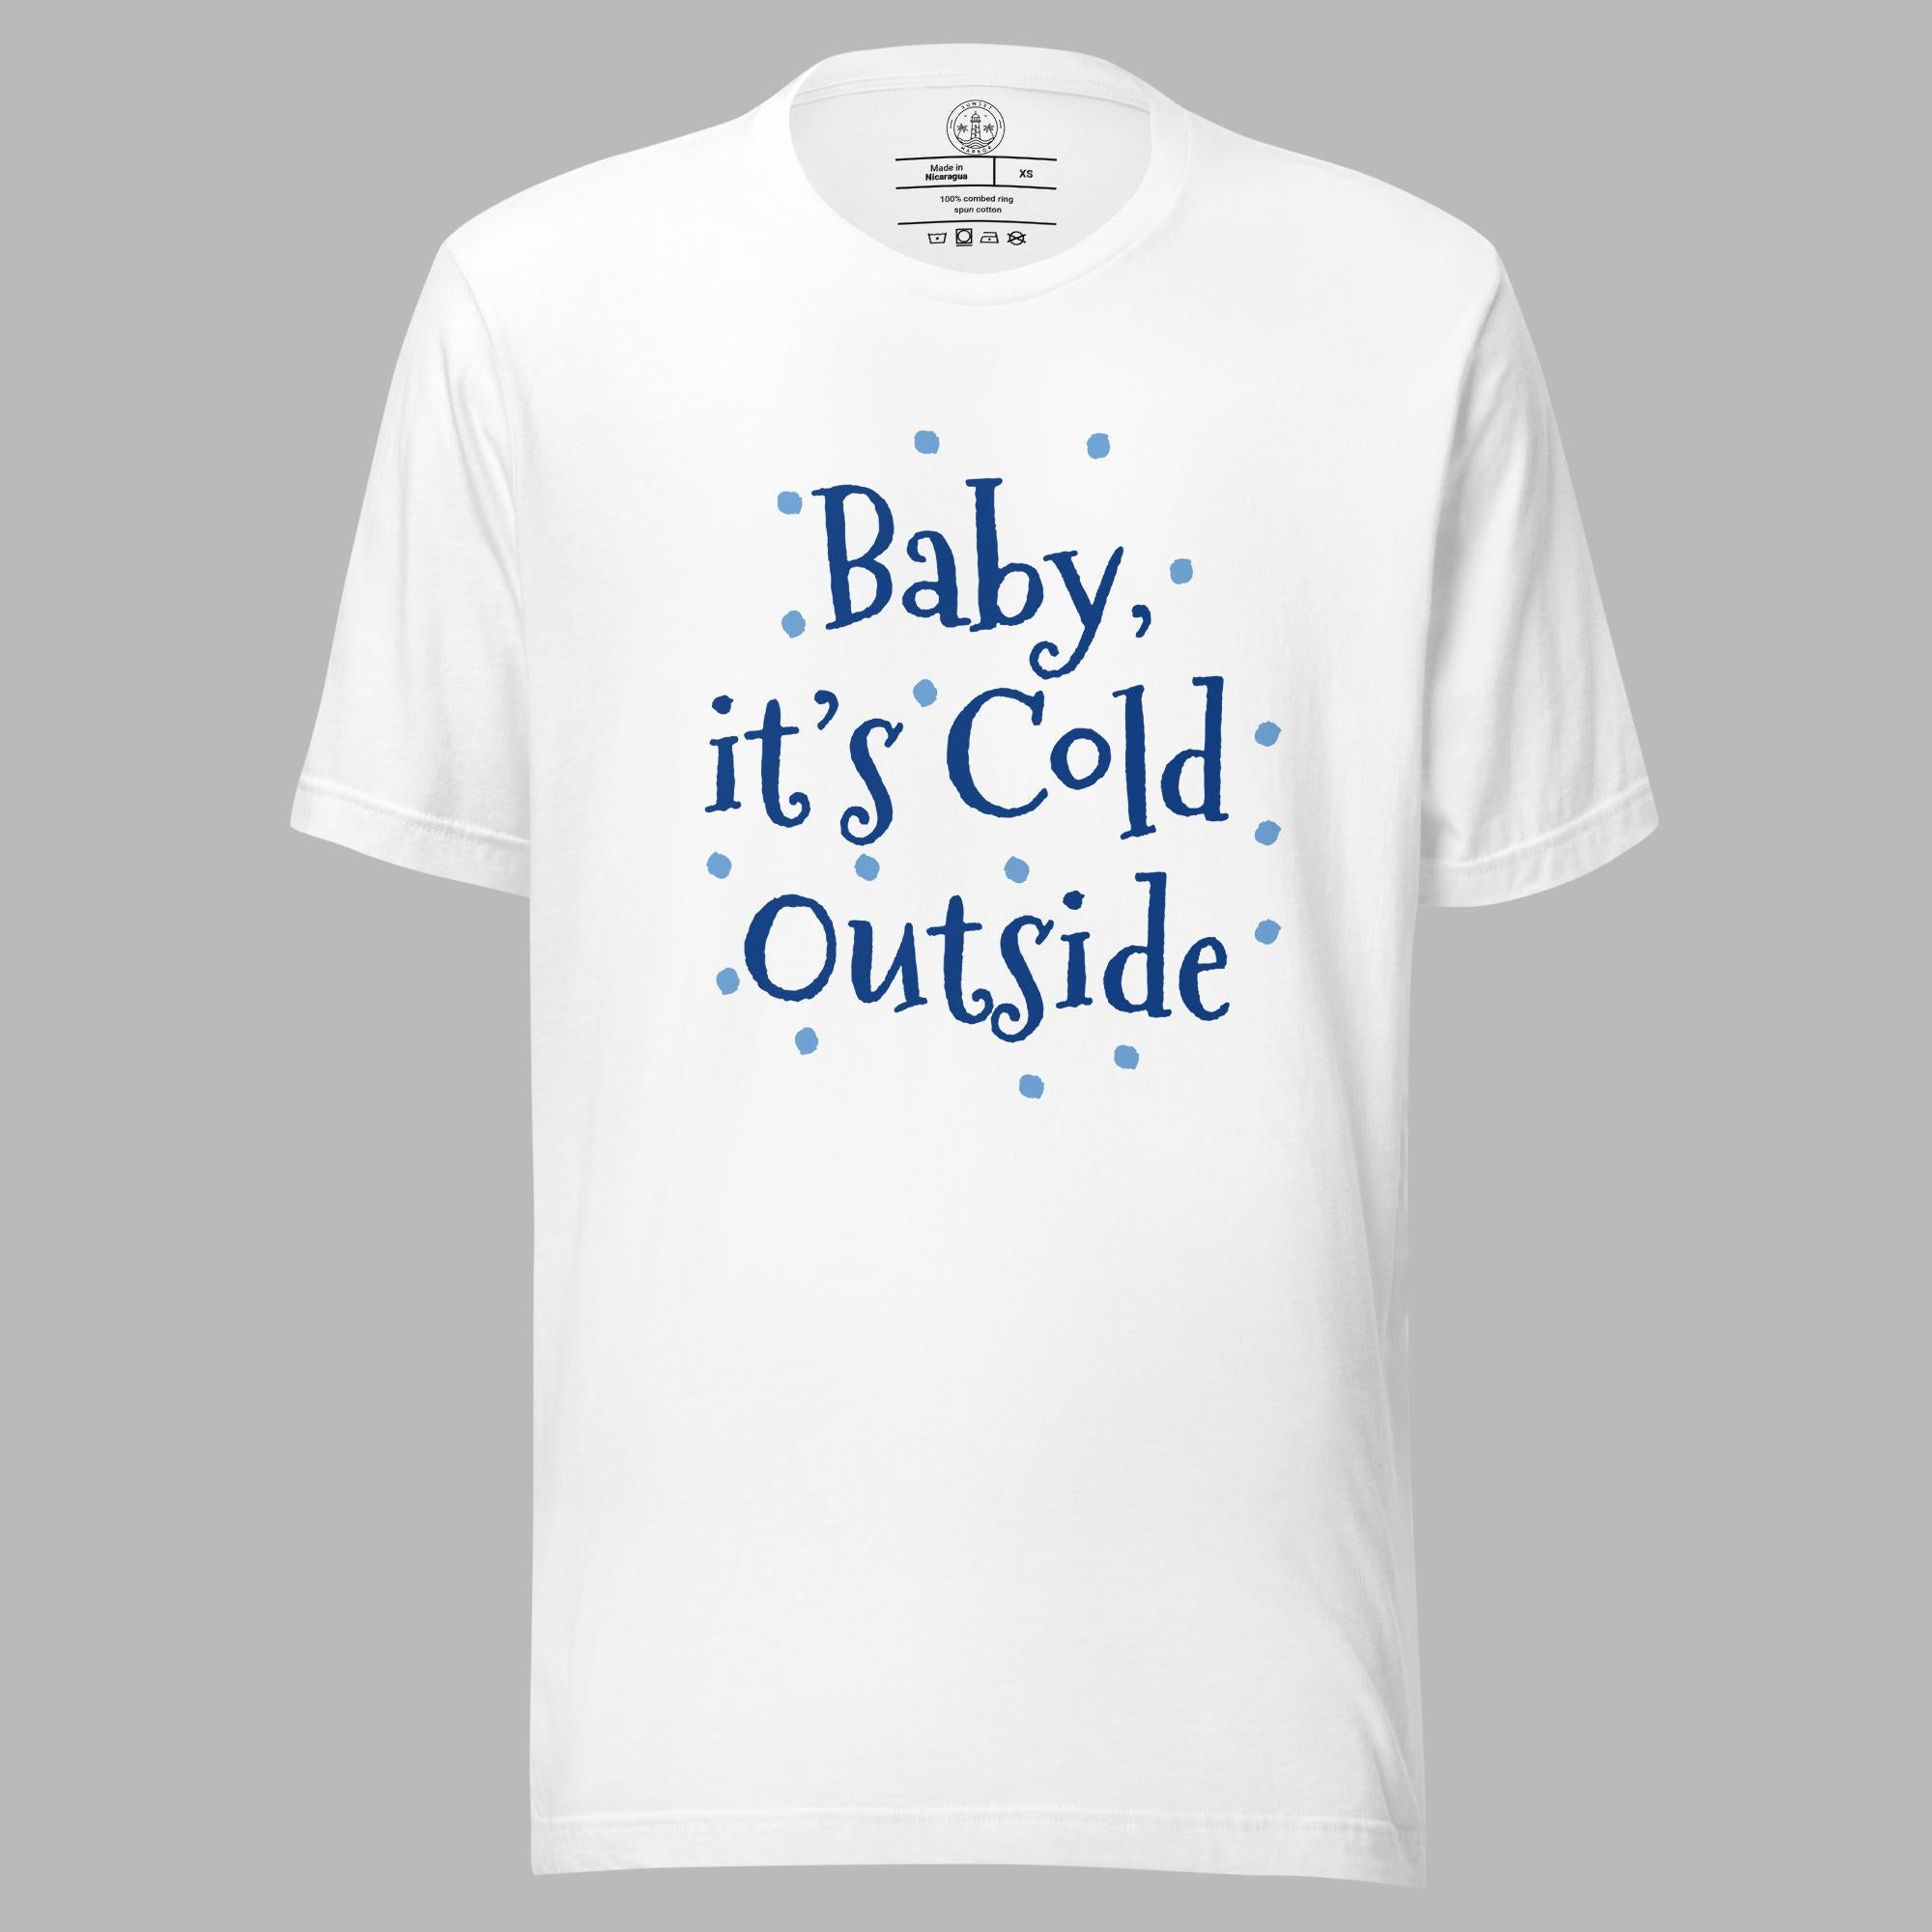 Unisex t-shirt - Baby it's Cold Outside